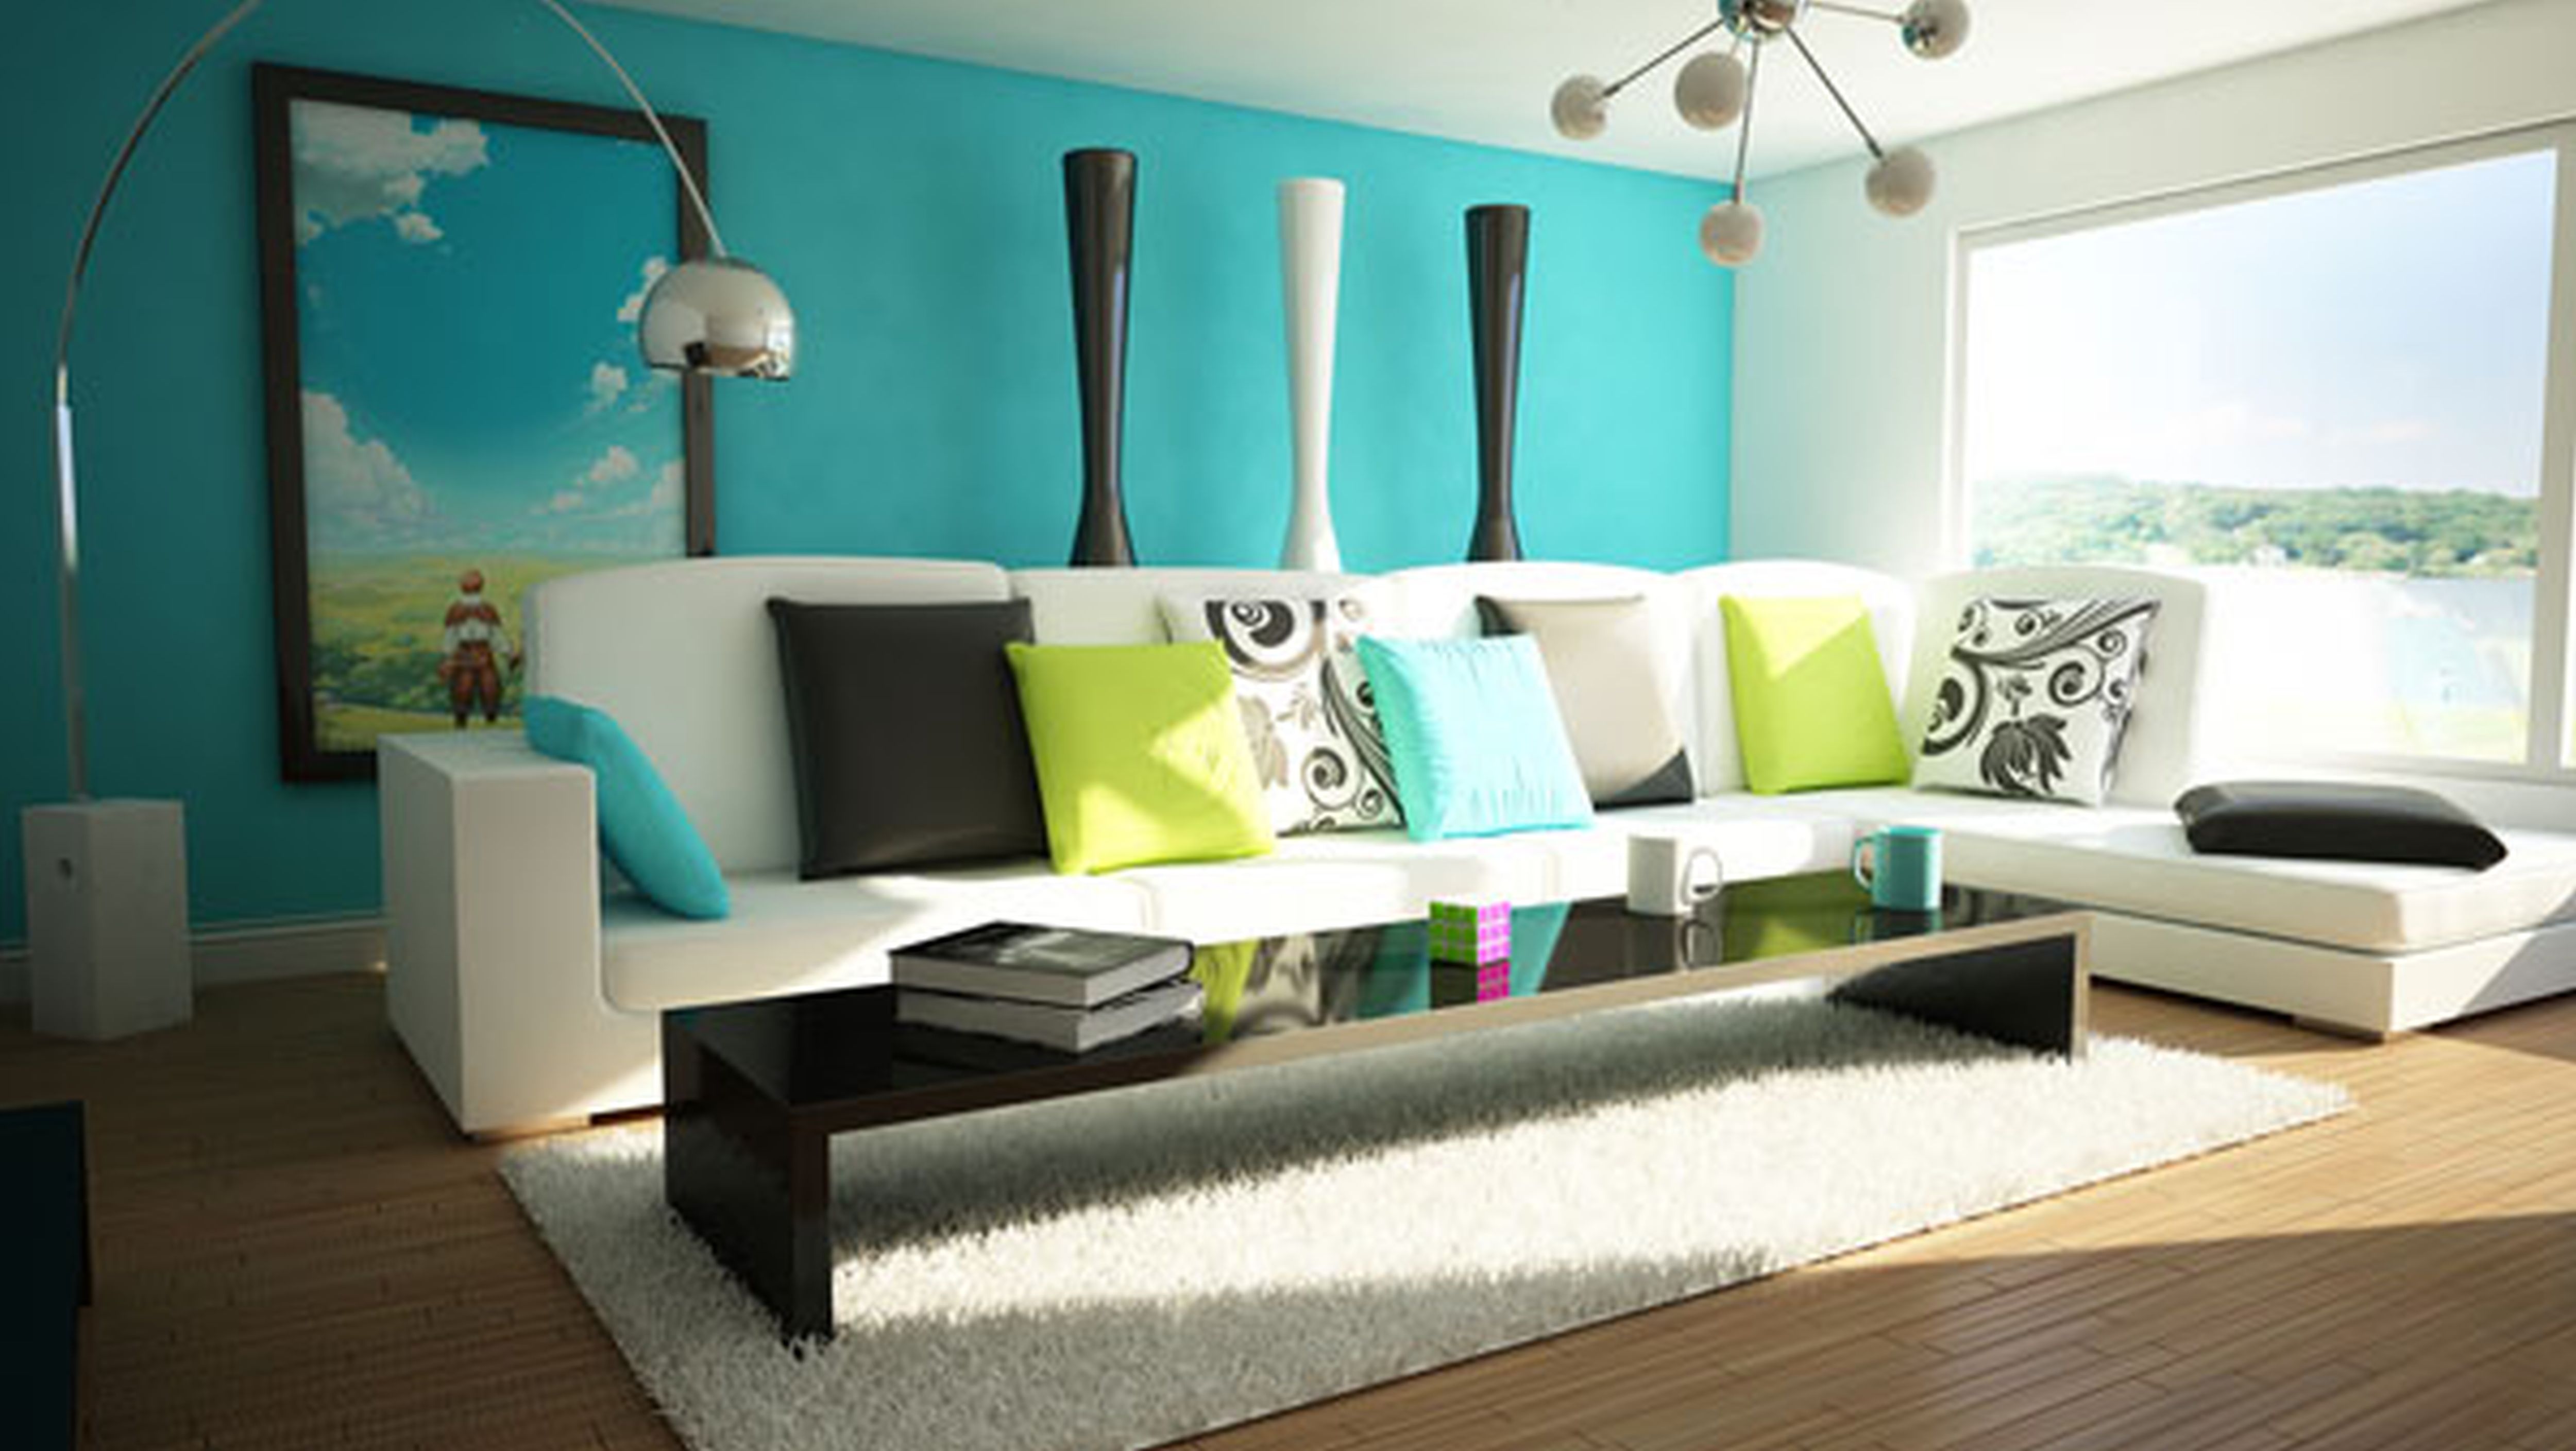 living-room-colorful-living-room-design-outstanding-nice-decor-cool-furniture-delightful-interior-design-logo-ideas-modern-style-matching-your-living-room-interior-colors-with-the-furniture-inside